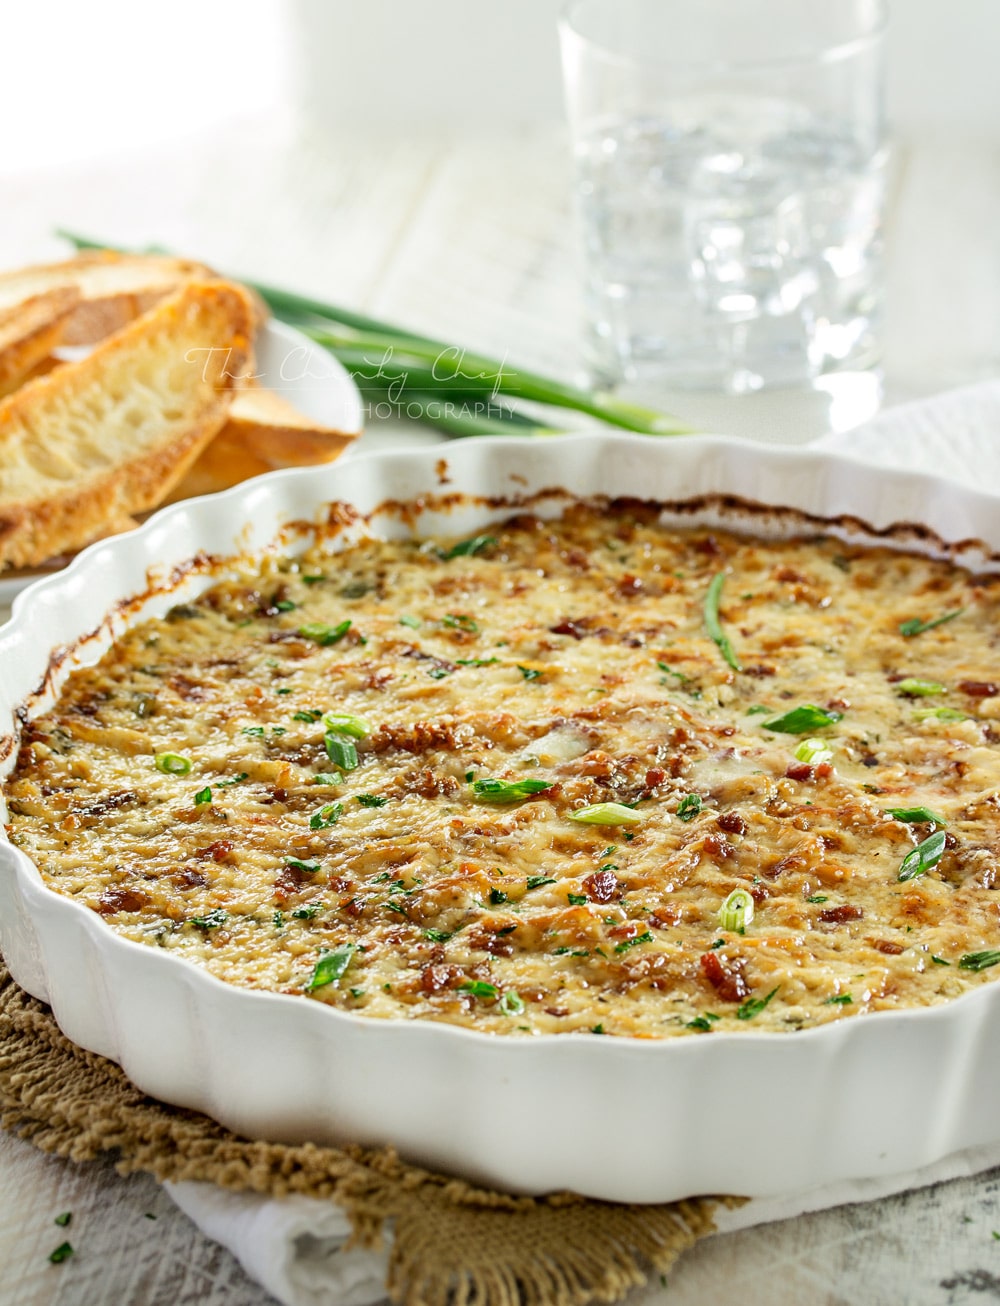 Caramelized Onion Dip | The ultimate party dip! This onion dip is made with gruyere, white cheddar, herbs, bacon, and rich caramelized onions for a melt in your mouth appetizer! | http://thechunkychef.com